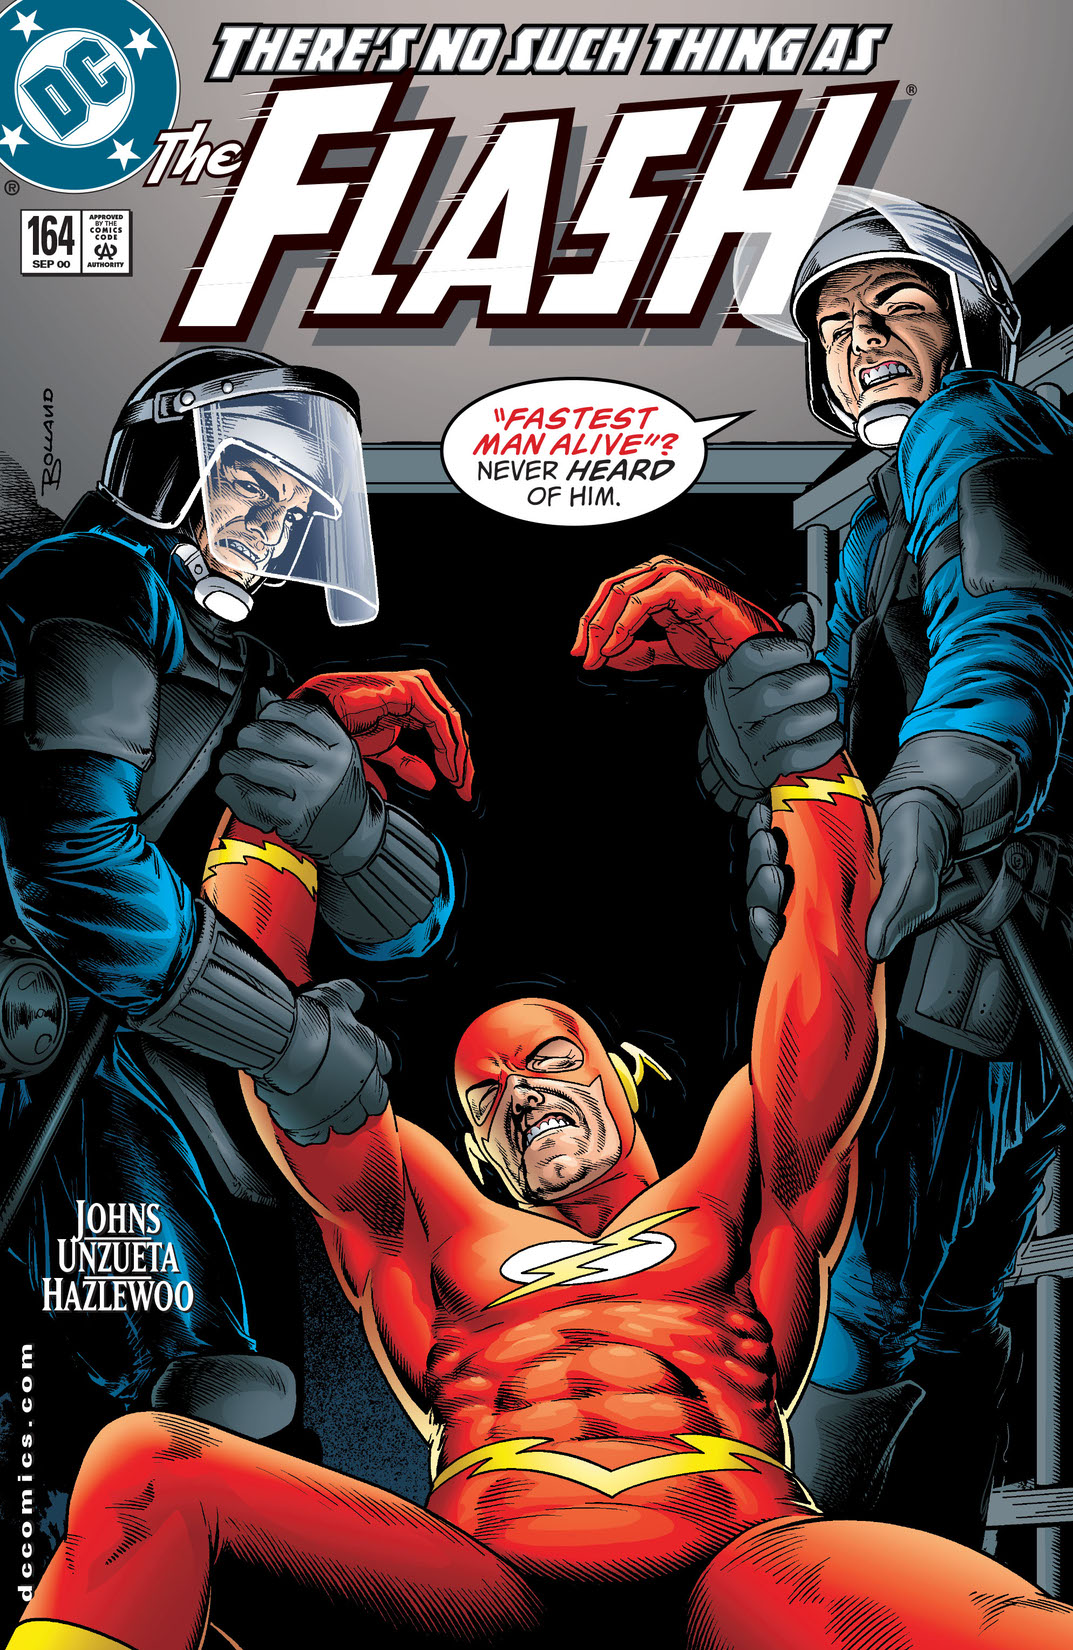 The Flash (1987-2009) #164 preview images